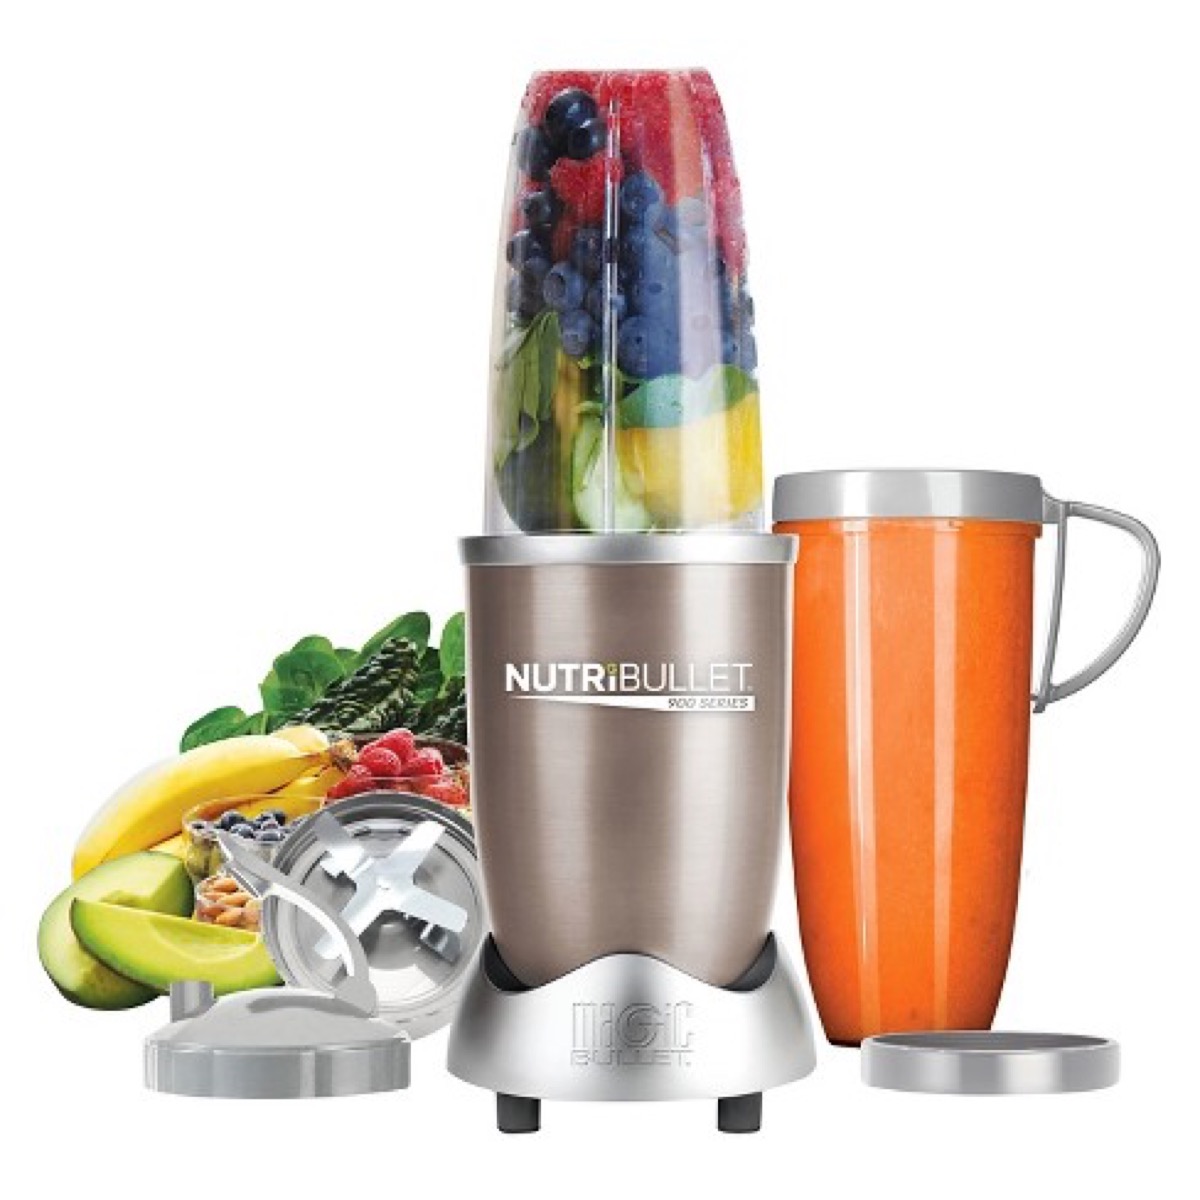 silver blender and orange cup and fruit, labor day tech sales